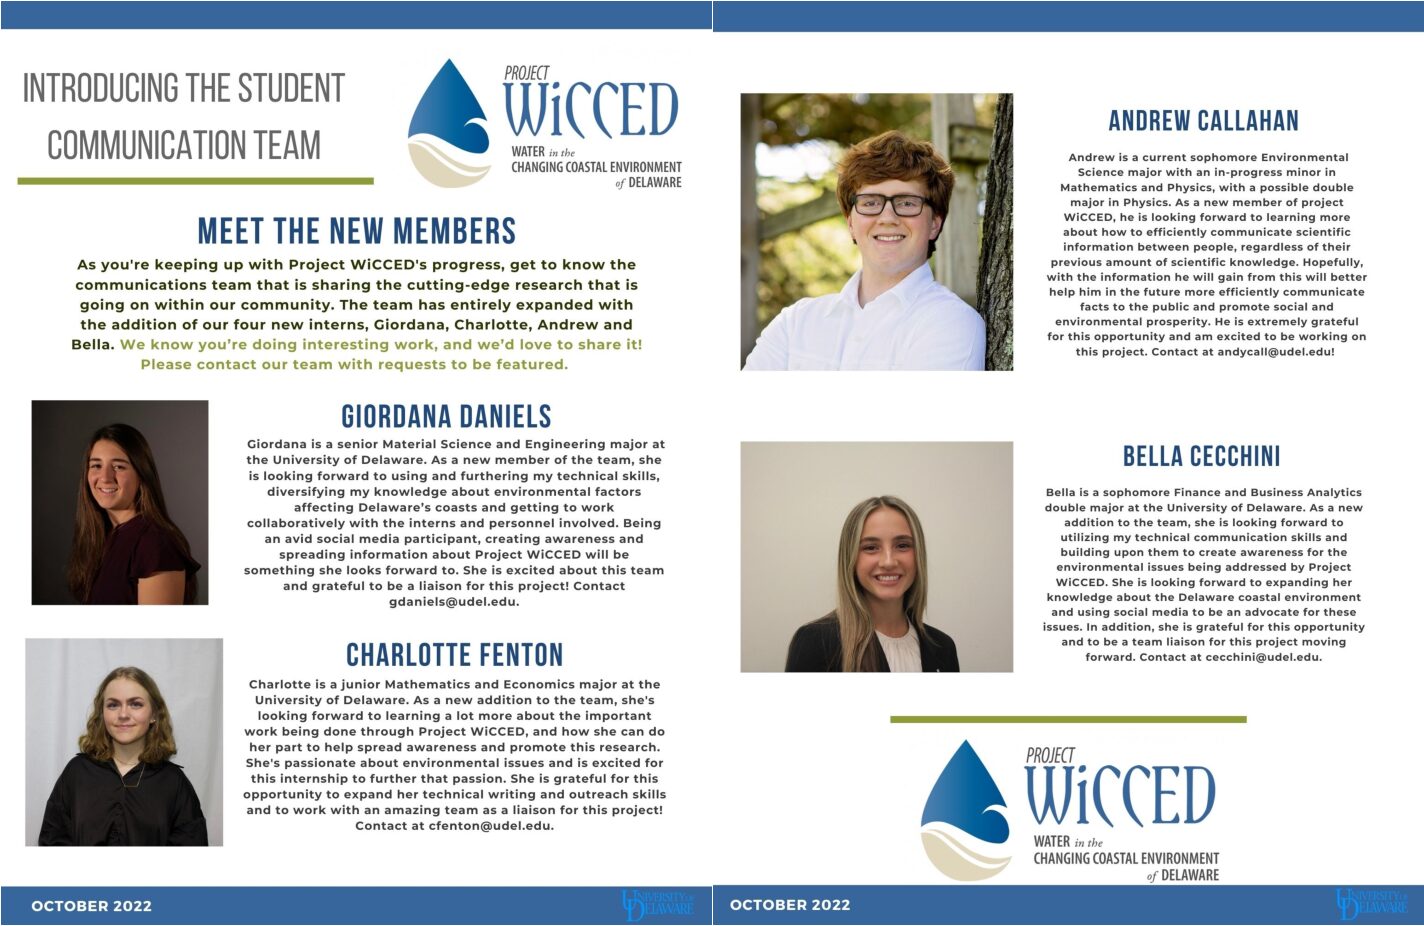 2022 Project WiCCED Communications Intern Newsletter